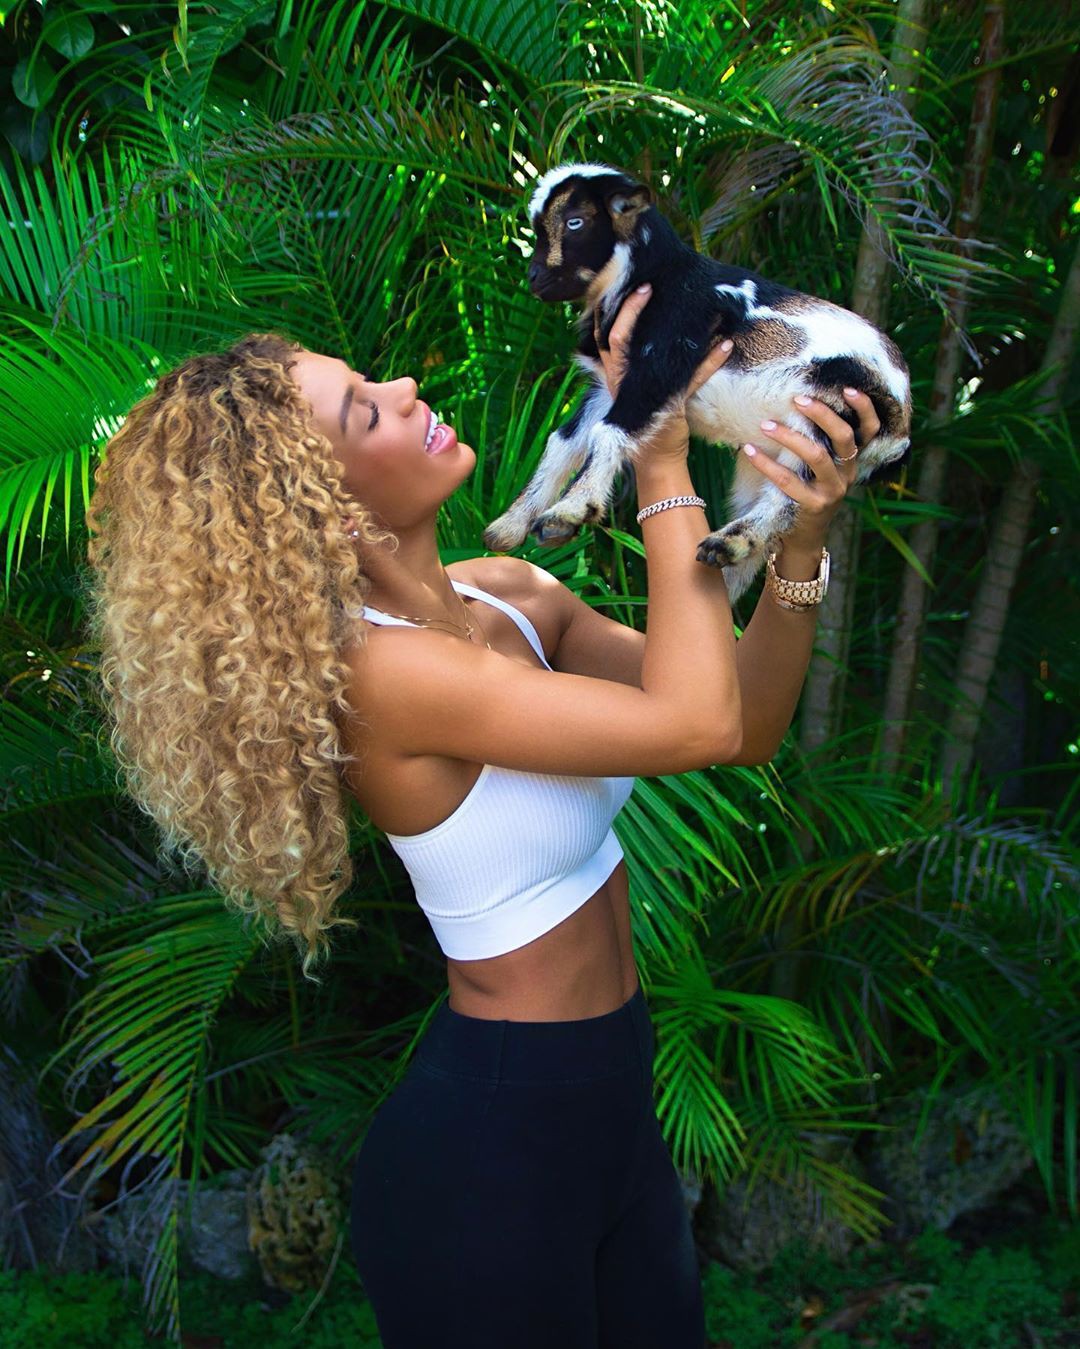 Jena Frumes beautiful girls pictures, natural environment, photography: Instagram girls,  Jena Frumes Instagram  